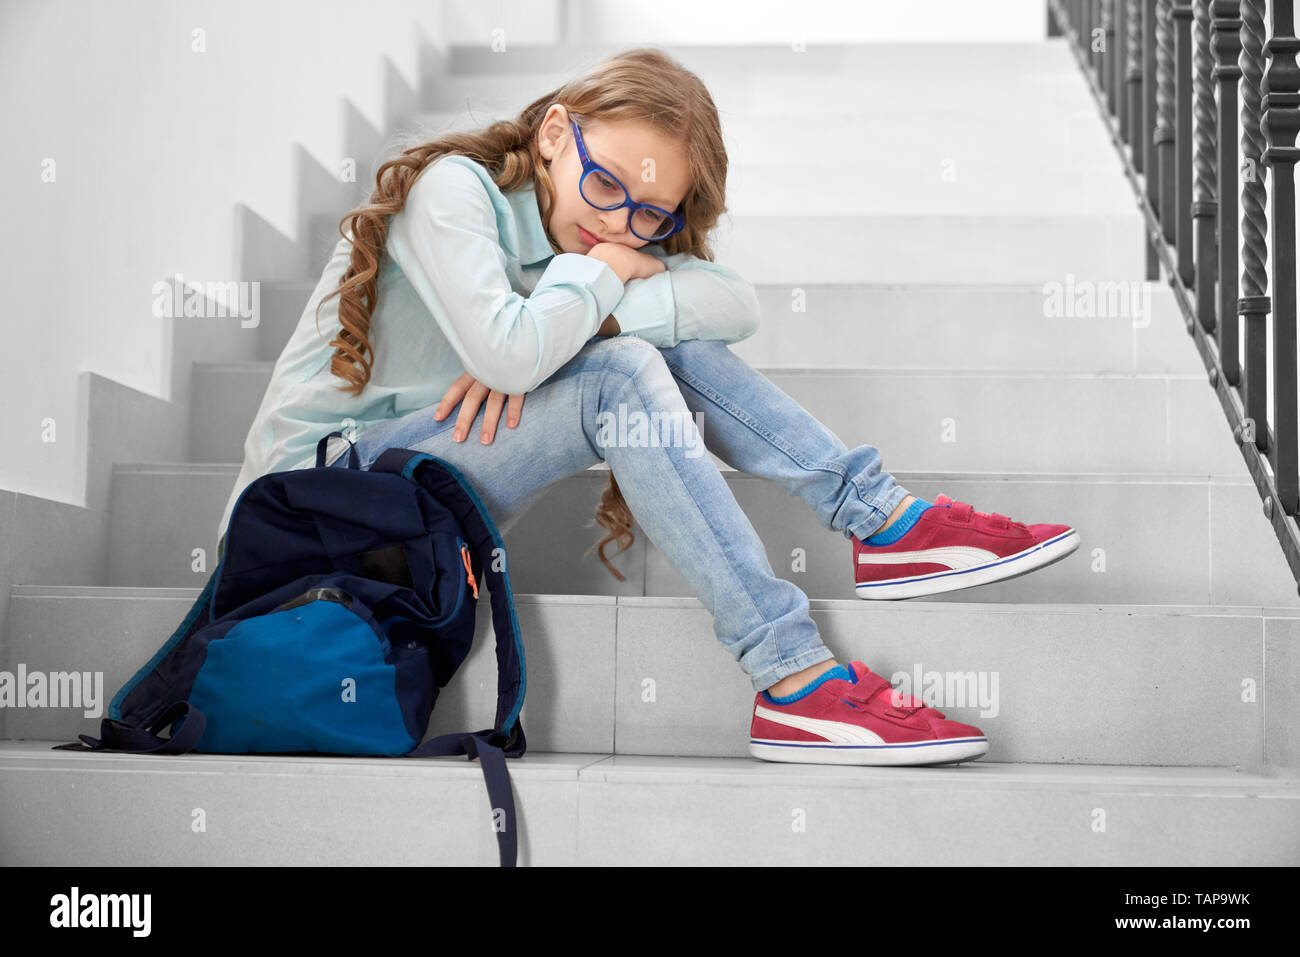 Pretty, sad schoolgirl in glasses sitting on staircase in school, leaning on knees. Depressed girl with long curly hair looking down, thinking. Stock Photo